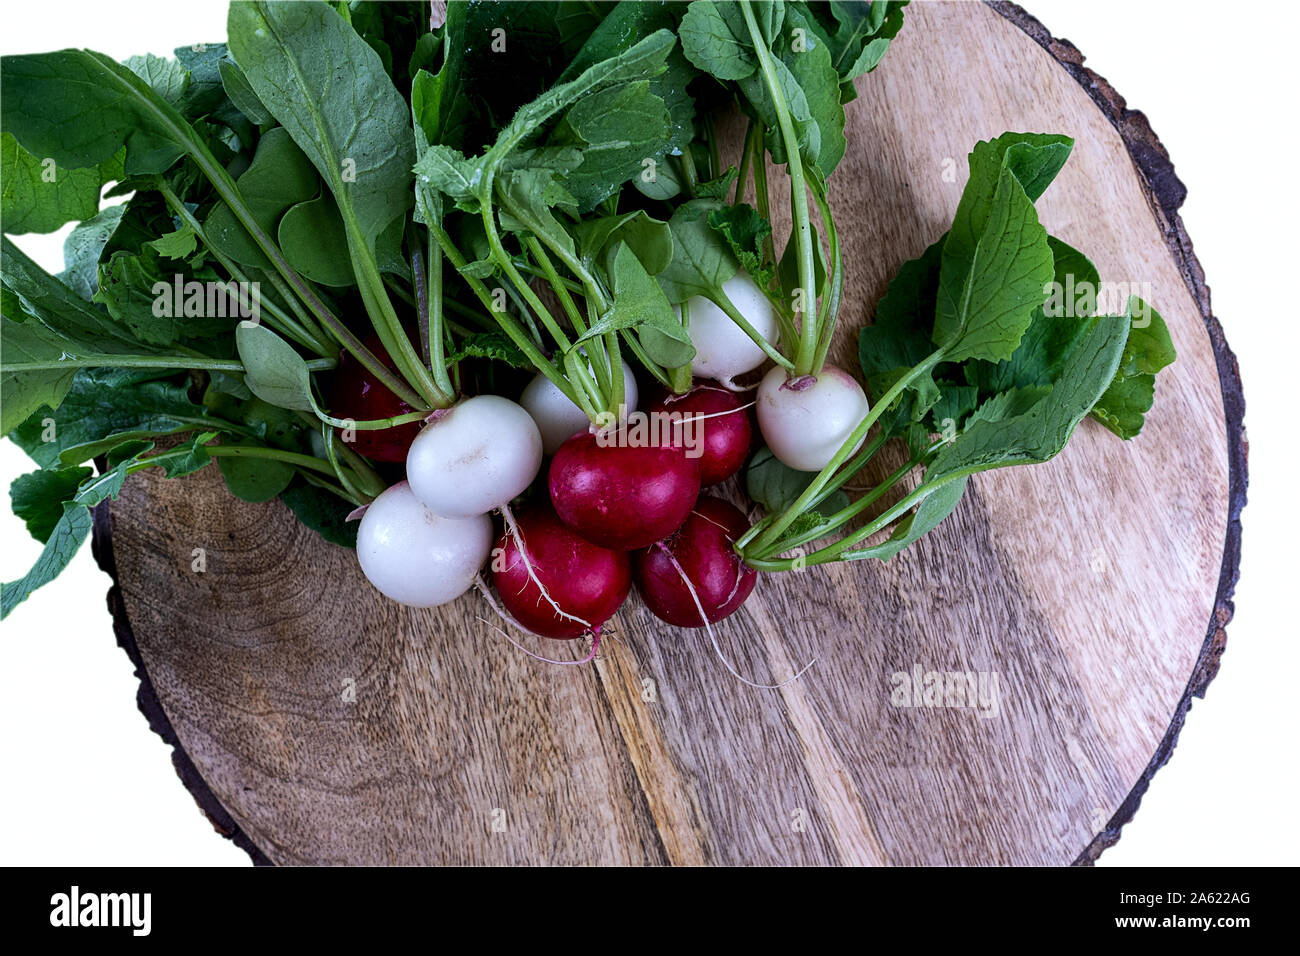 red and white radish with leaves on a wooden plate Stock Photo